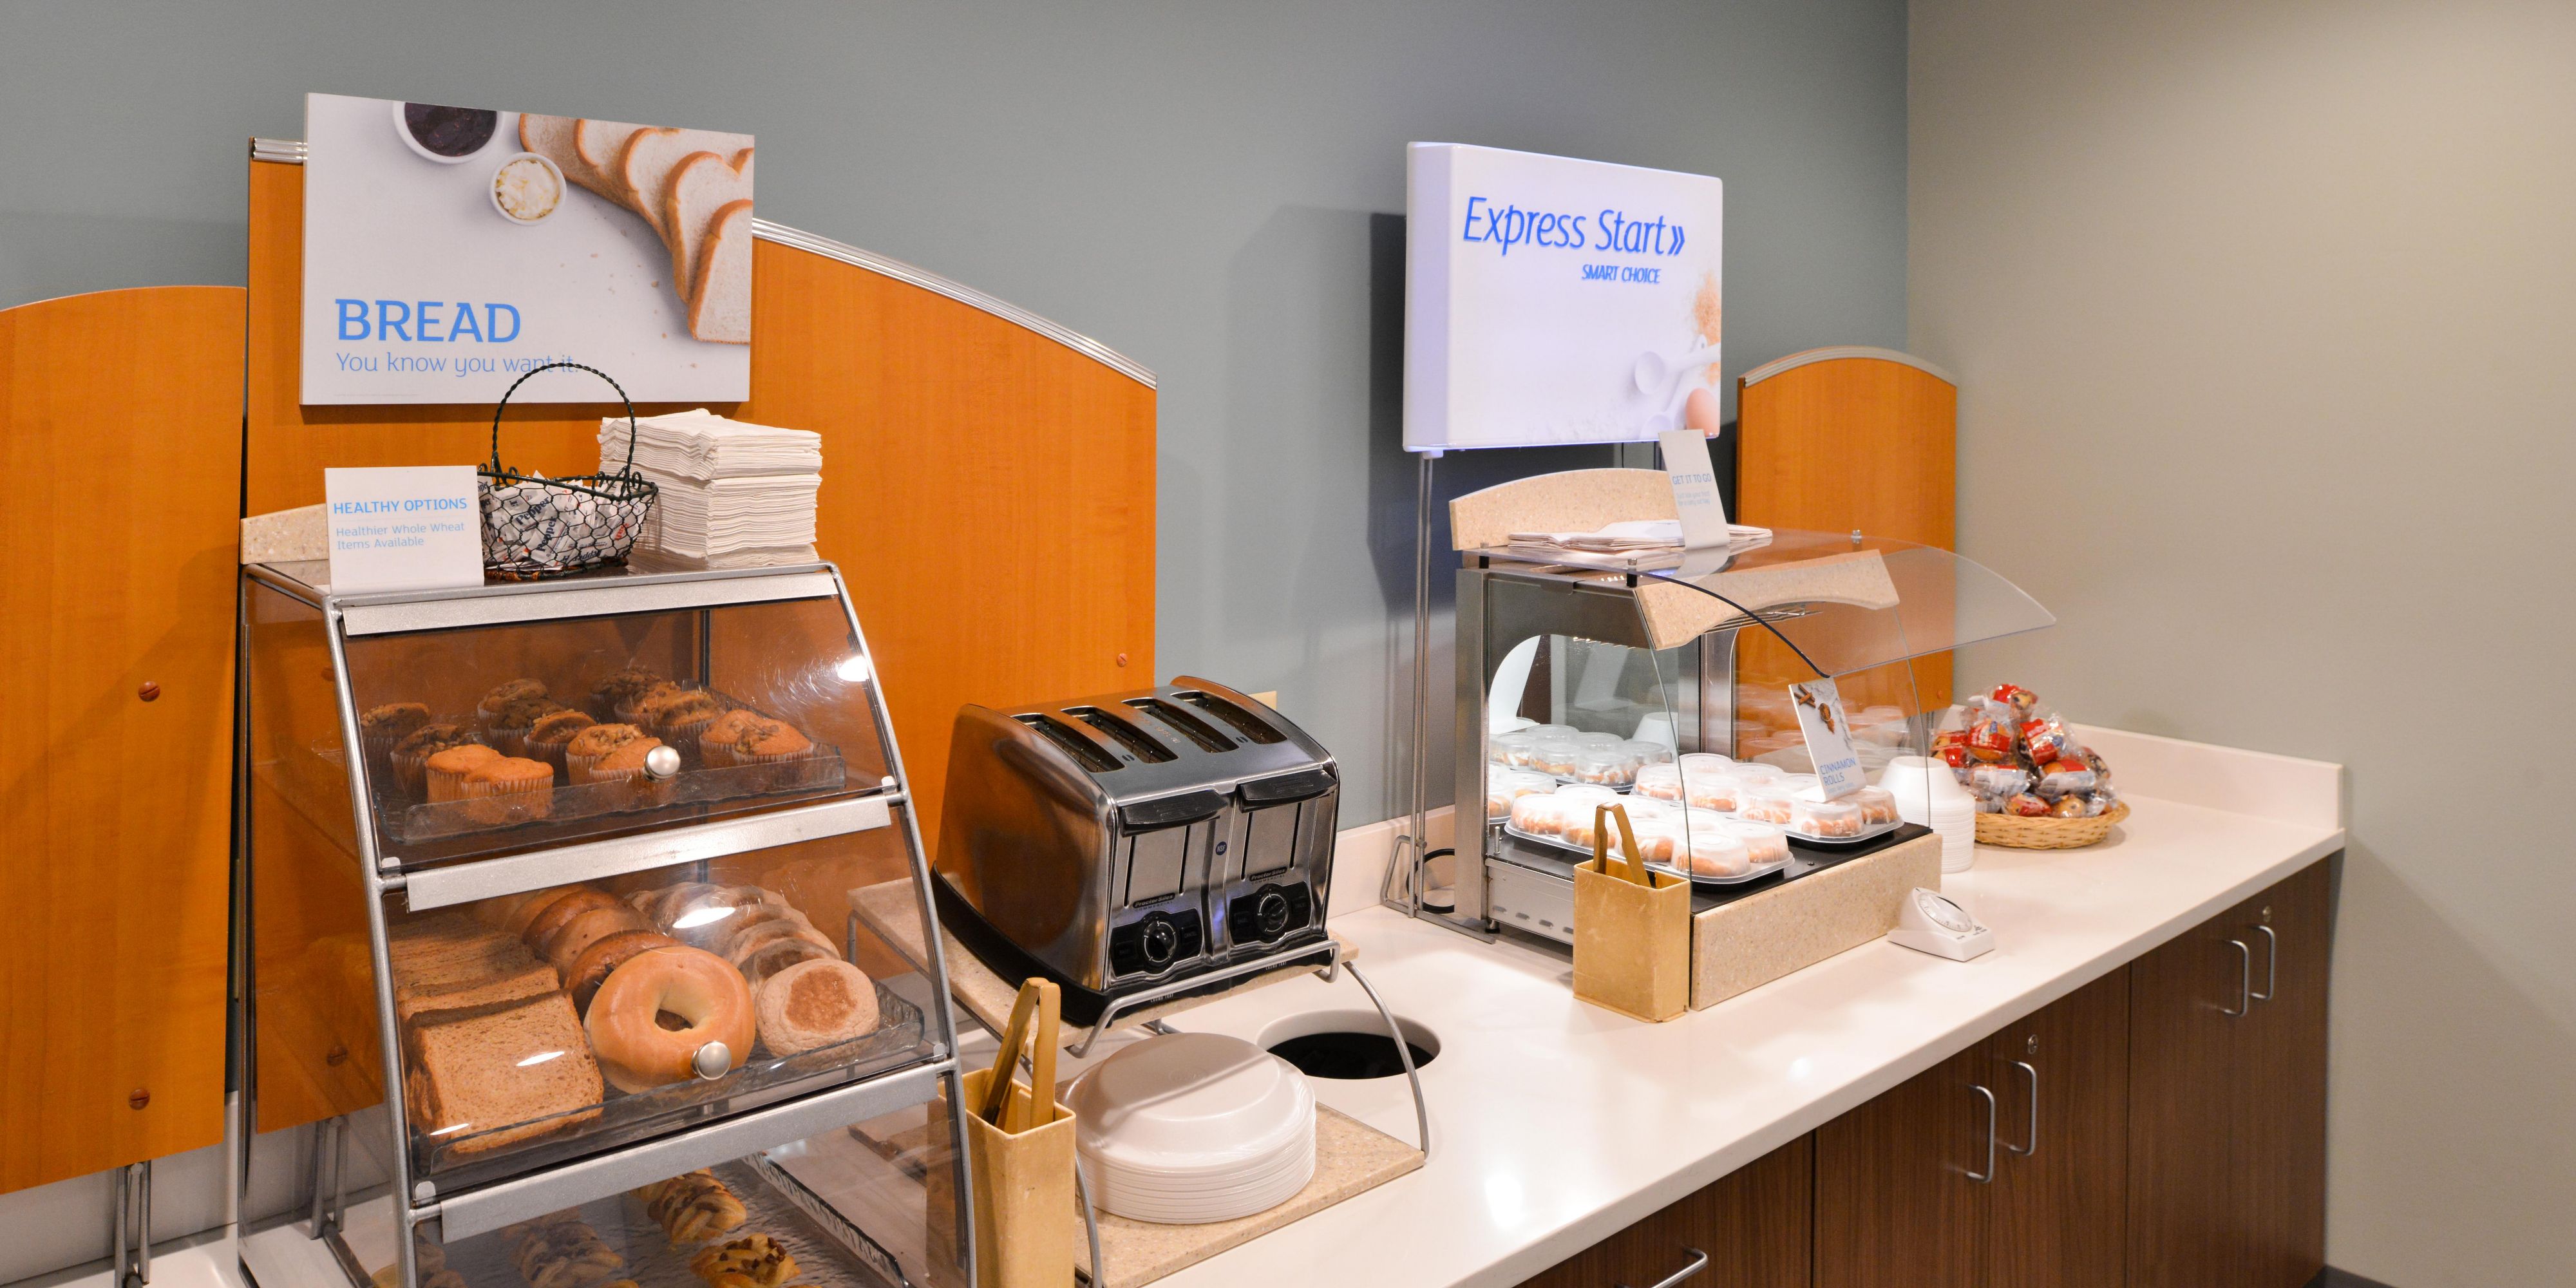 The Breakfast Bar at the Holiday Inn Express is plentiful to get you going in the morning and is included with your room.  Our team enjoys greeting our guests and providing great conversation to start your day.  We look forward to seeing you.